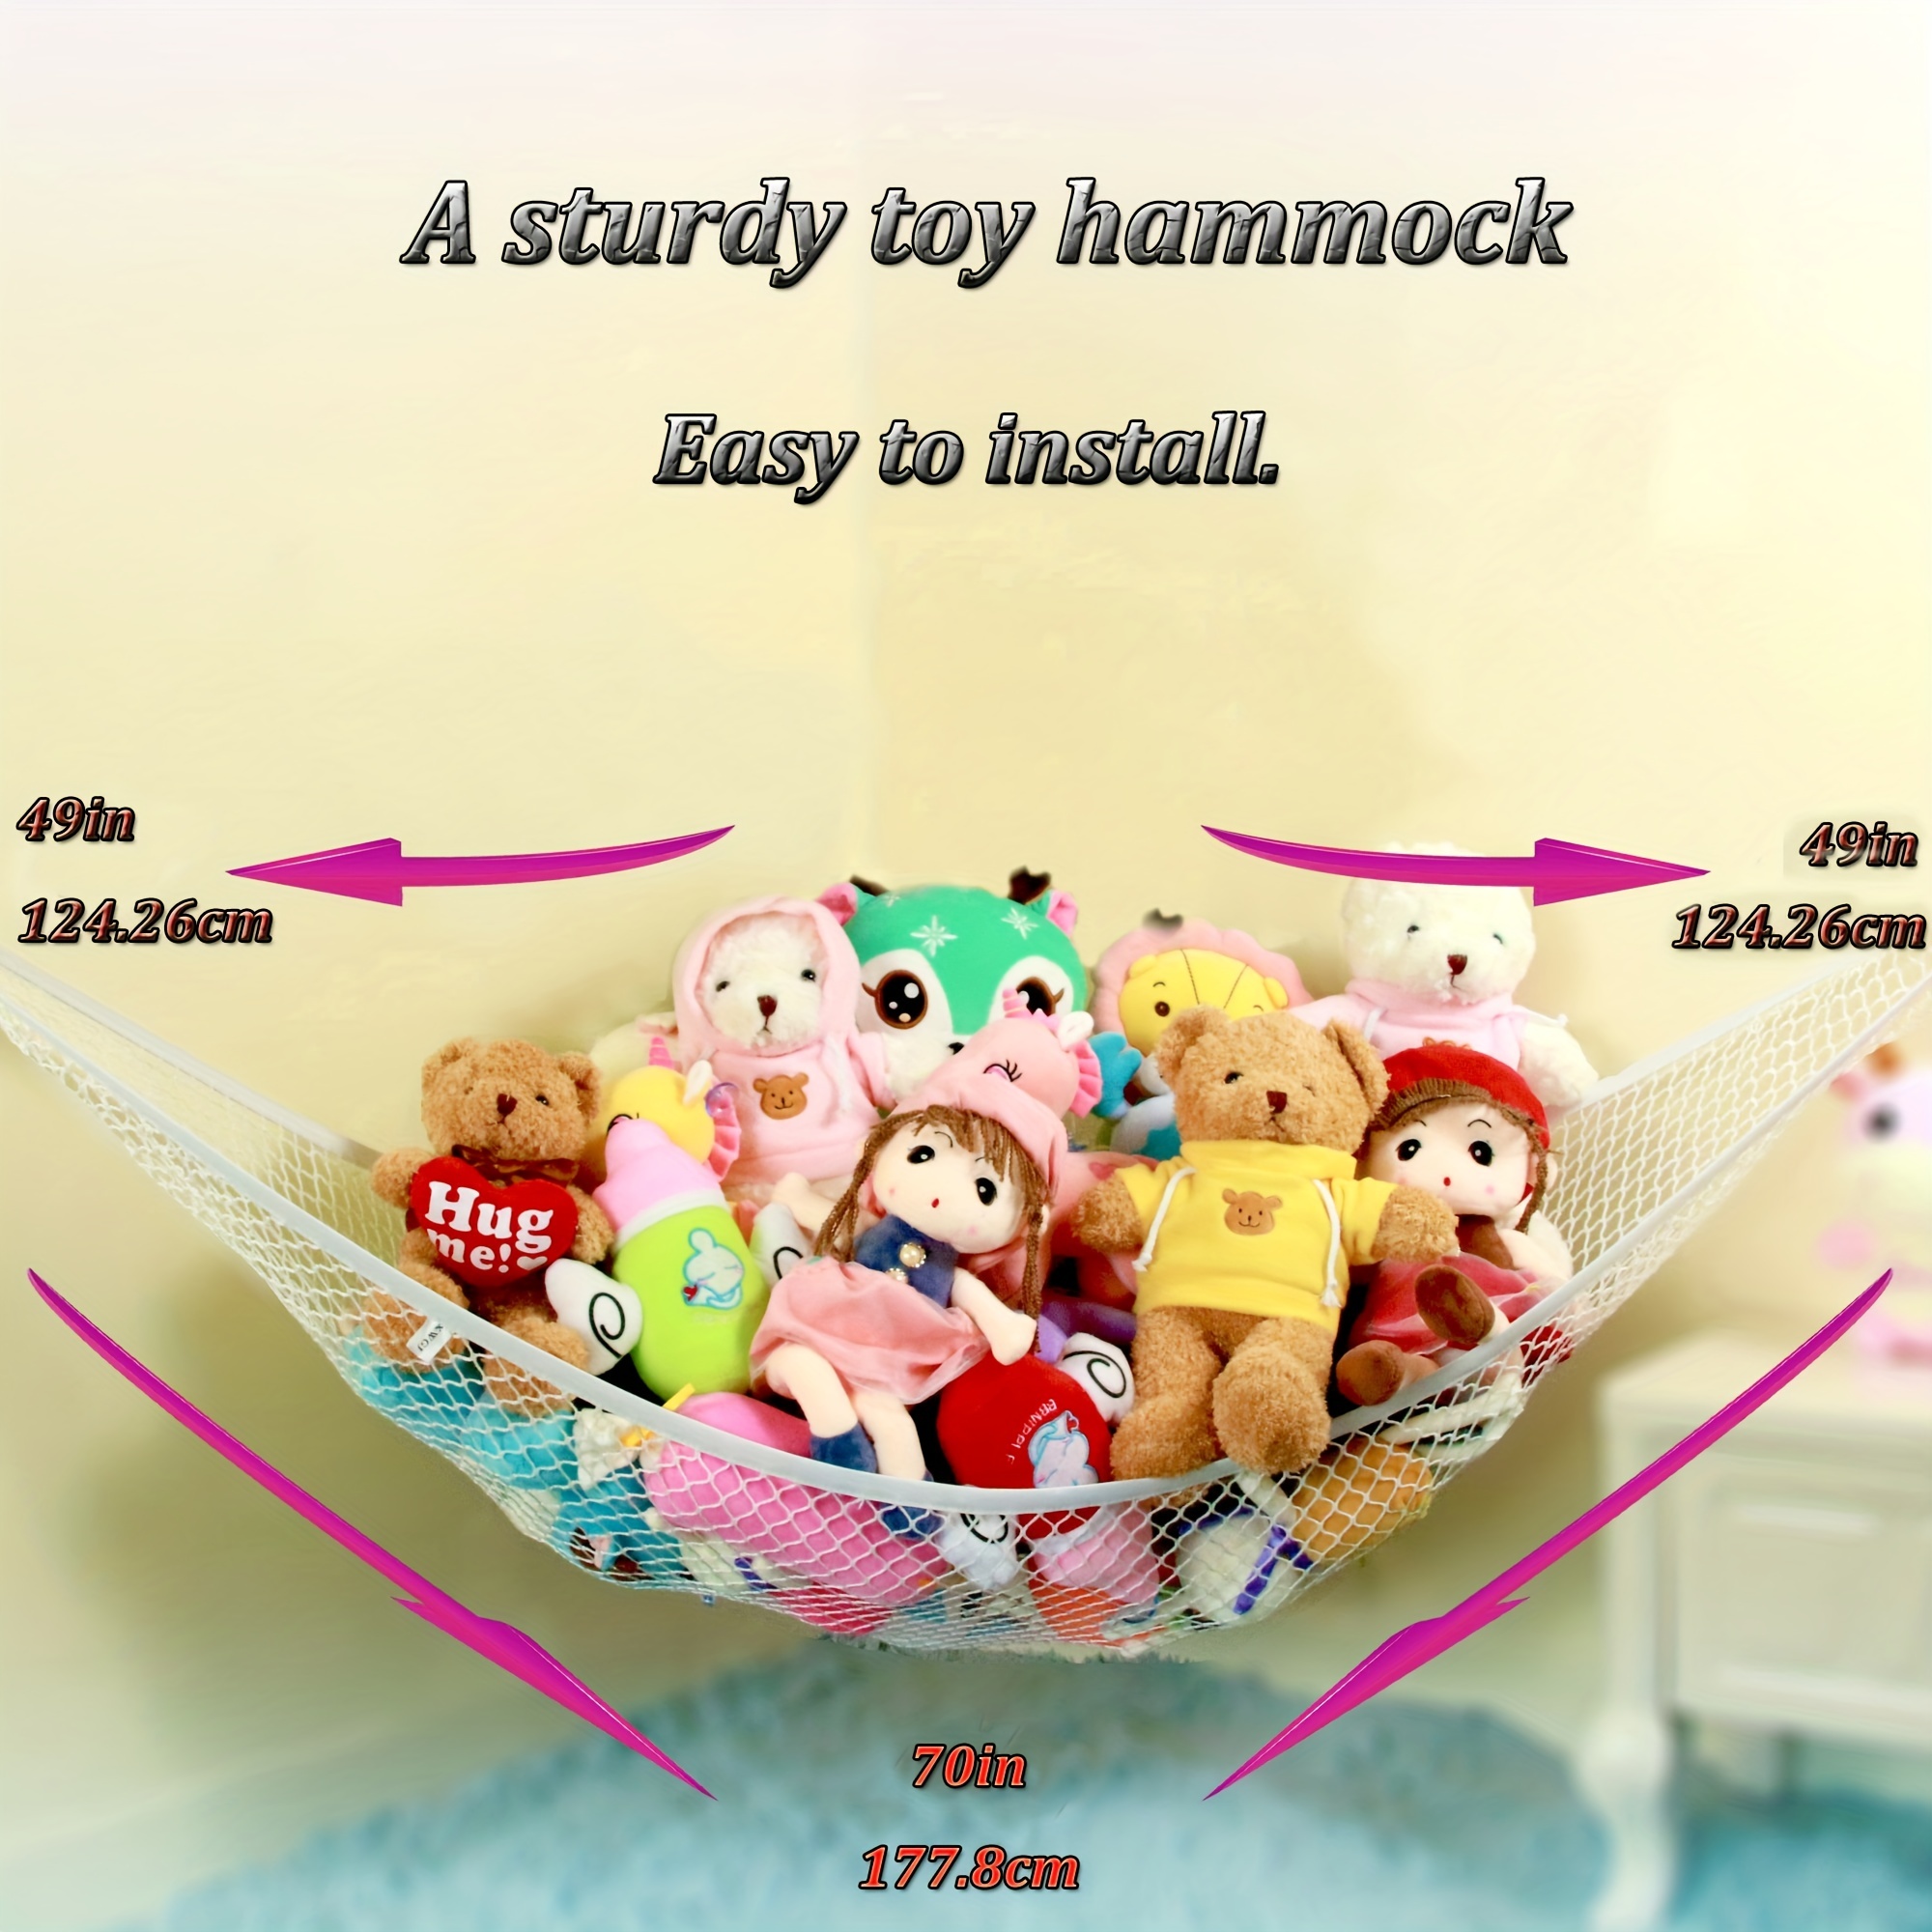 Stuffed Animal Net Or Hammock, Toy Hammock, Teddy Bear Hammock, There Are  25 Rubber Bands In The Elastic Of Our Stuffed Animal Storage Net (Large)